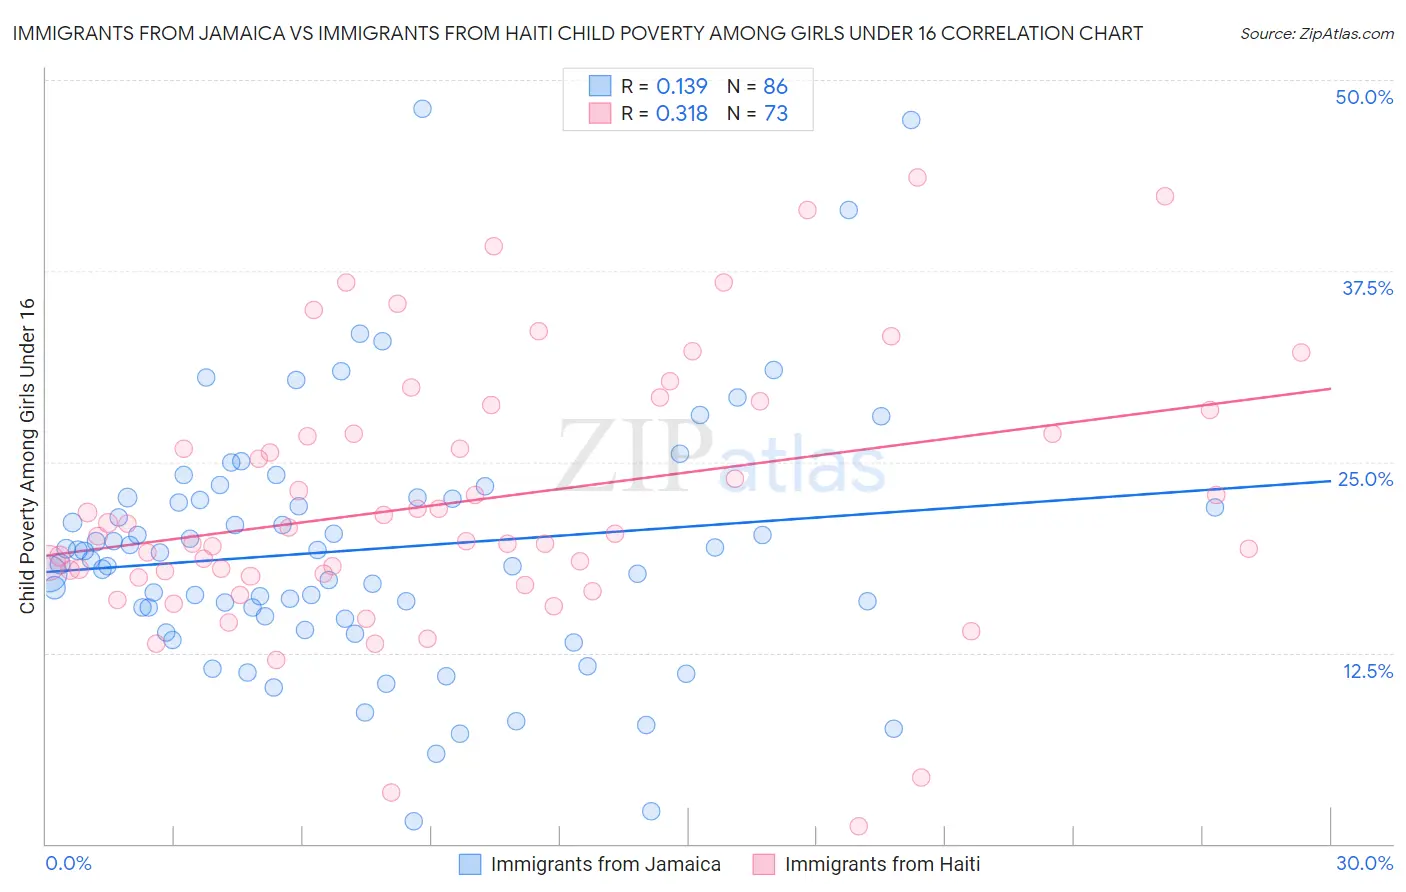 Immigrants from Jamaica vs Immigrants from Haiti Child Poverty Among Girls Under 16